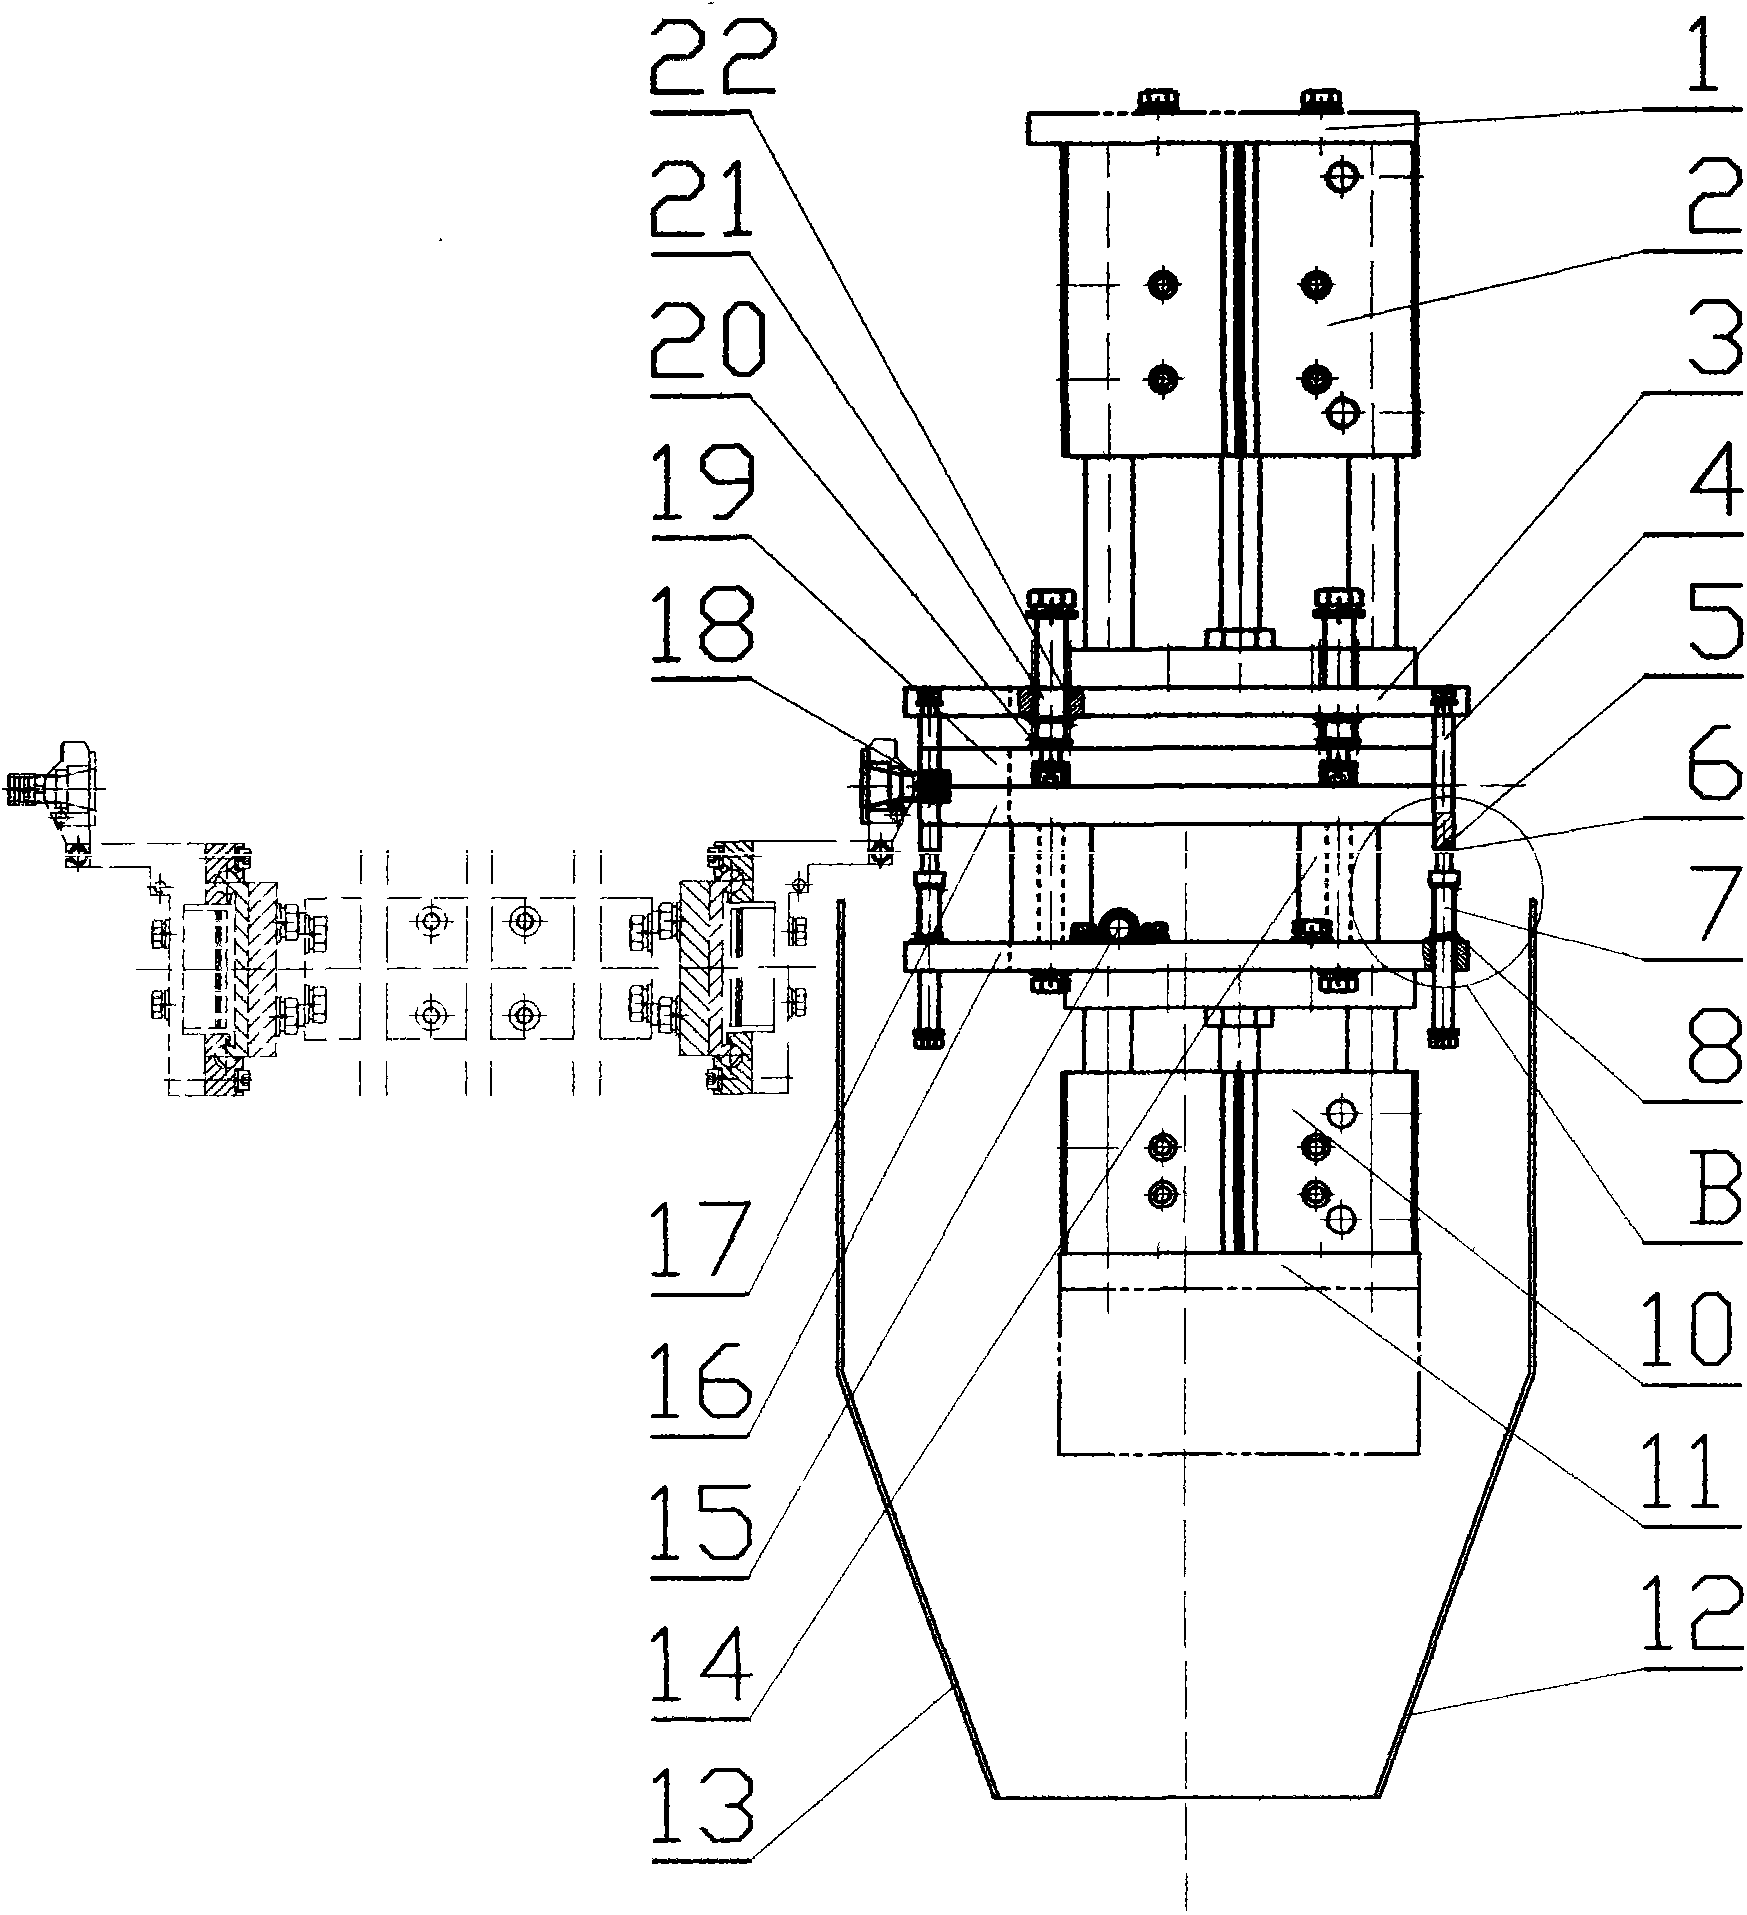 Waste-removing device applied in the process of producing large transfusion soft bag